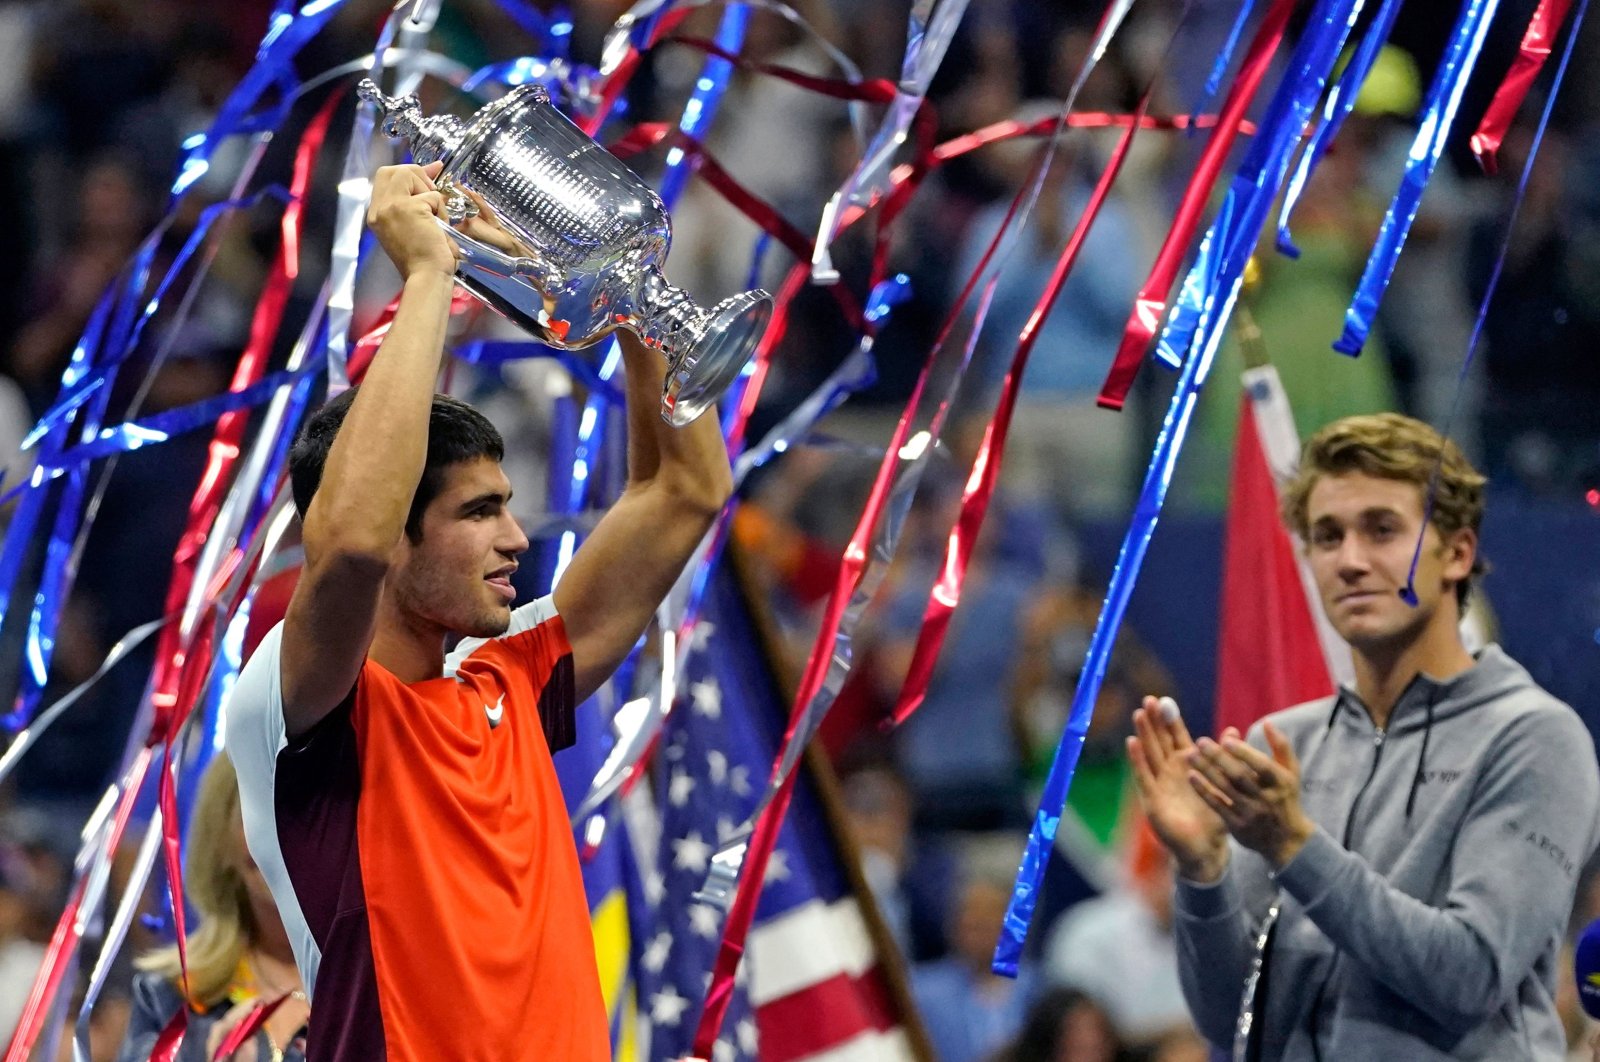 Spain&#039;s Carlos Alcaraz (L) celebrates with the trophy after winning against Norway&#039;s Casper Ruud during their 2022 U.S. Open men&#039;s singles final, New York, U.S., Sept. 11, 2022. (AFP Photo)